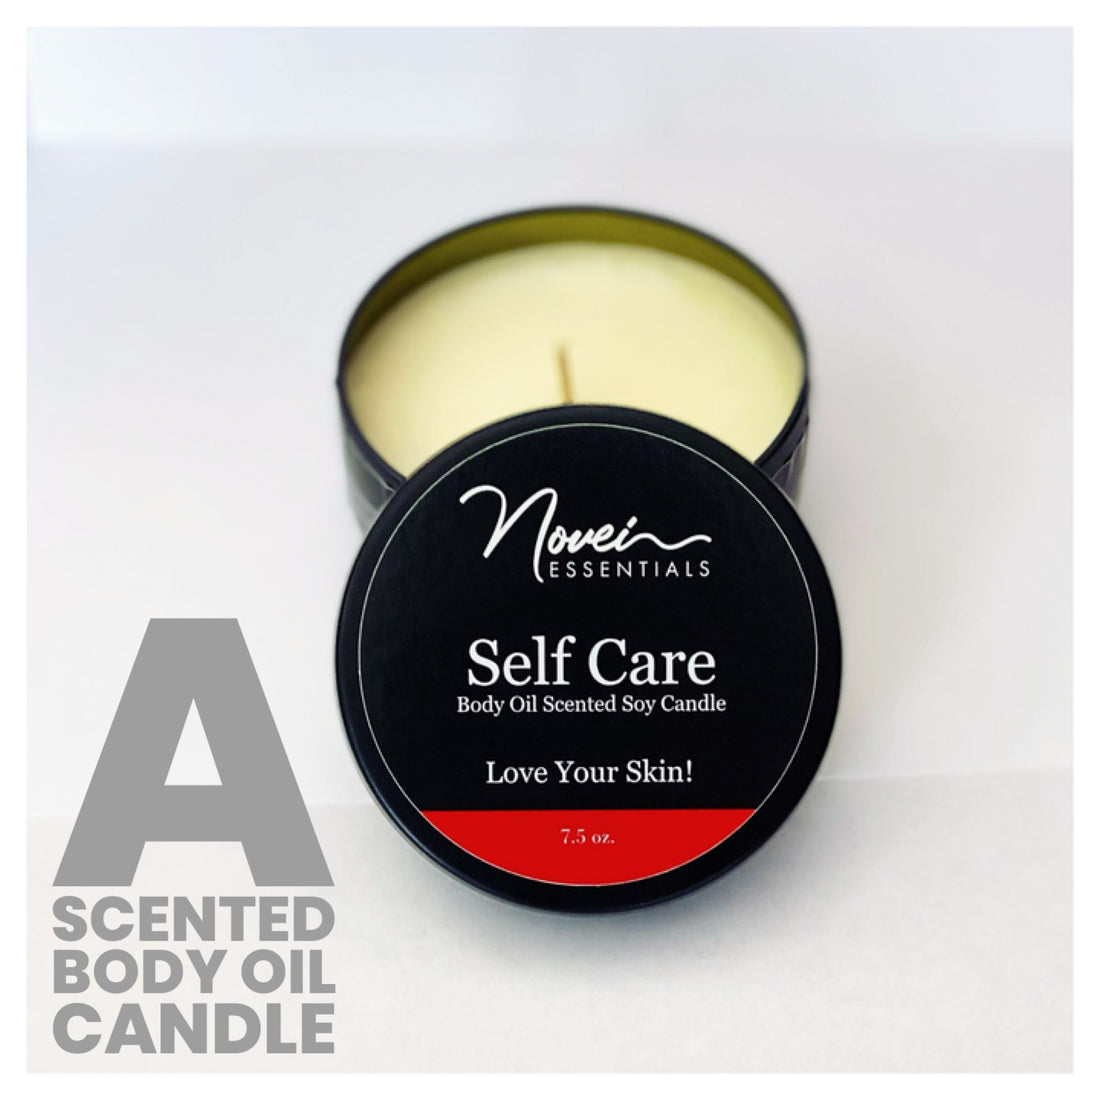 What Is A Body Oil Candle?